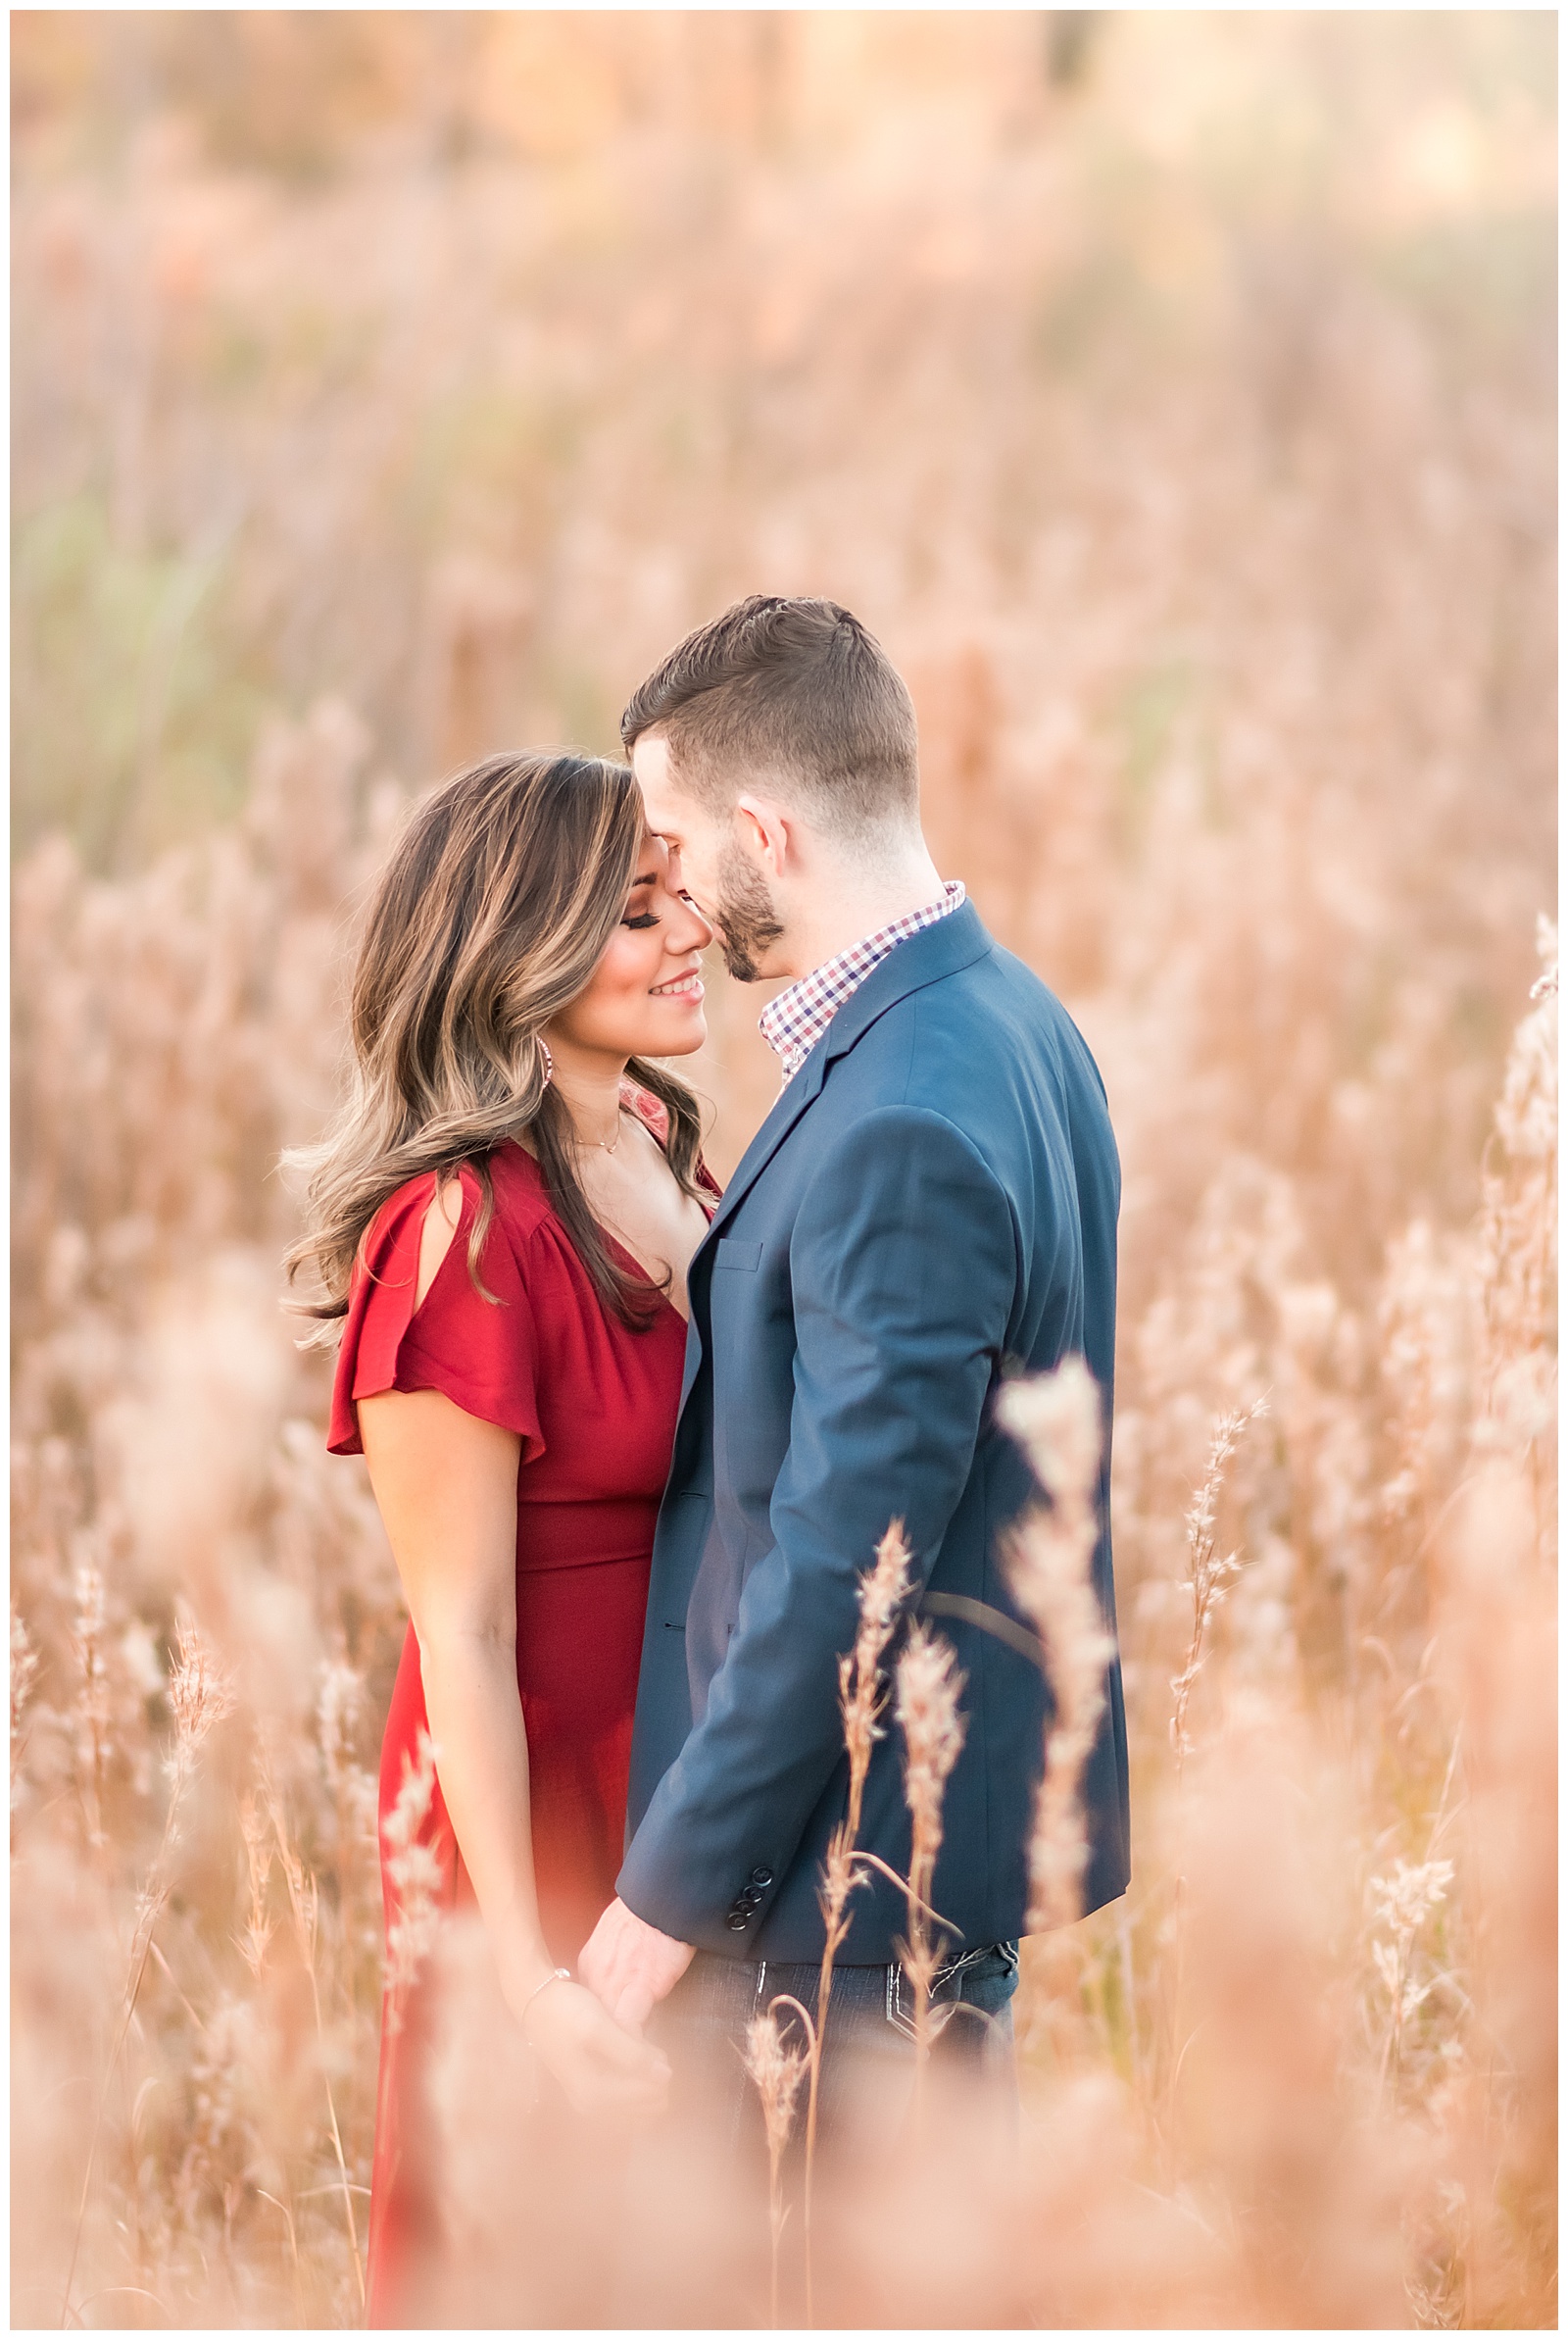 Engagement Photography in The Woodlands Texas